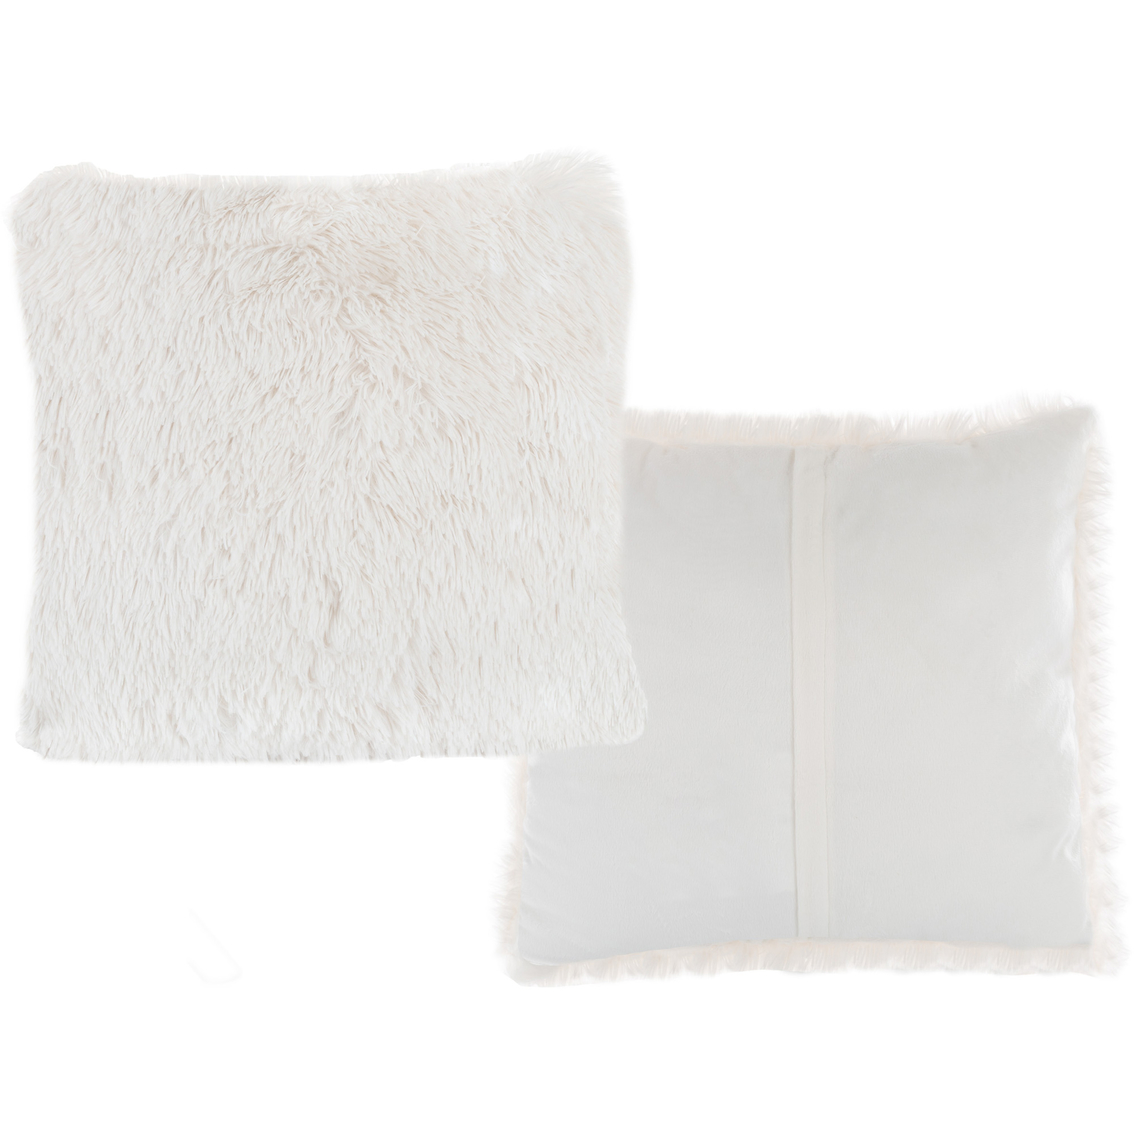 Hastings Home 2 pc. Faux Fur Shag Pillows Set - Image 2 of 4